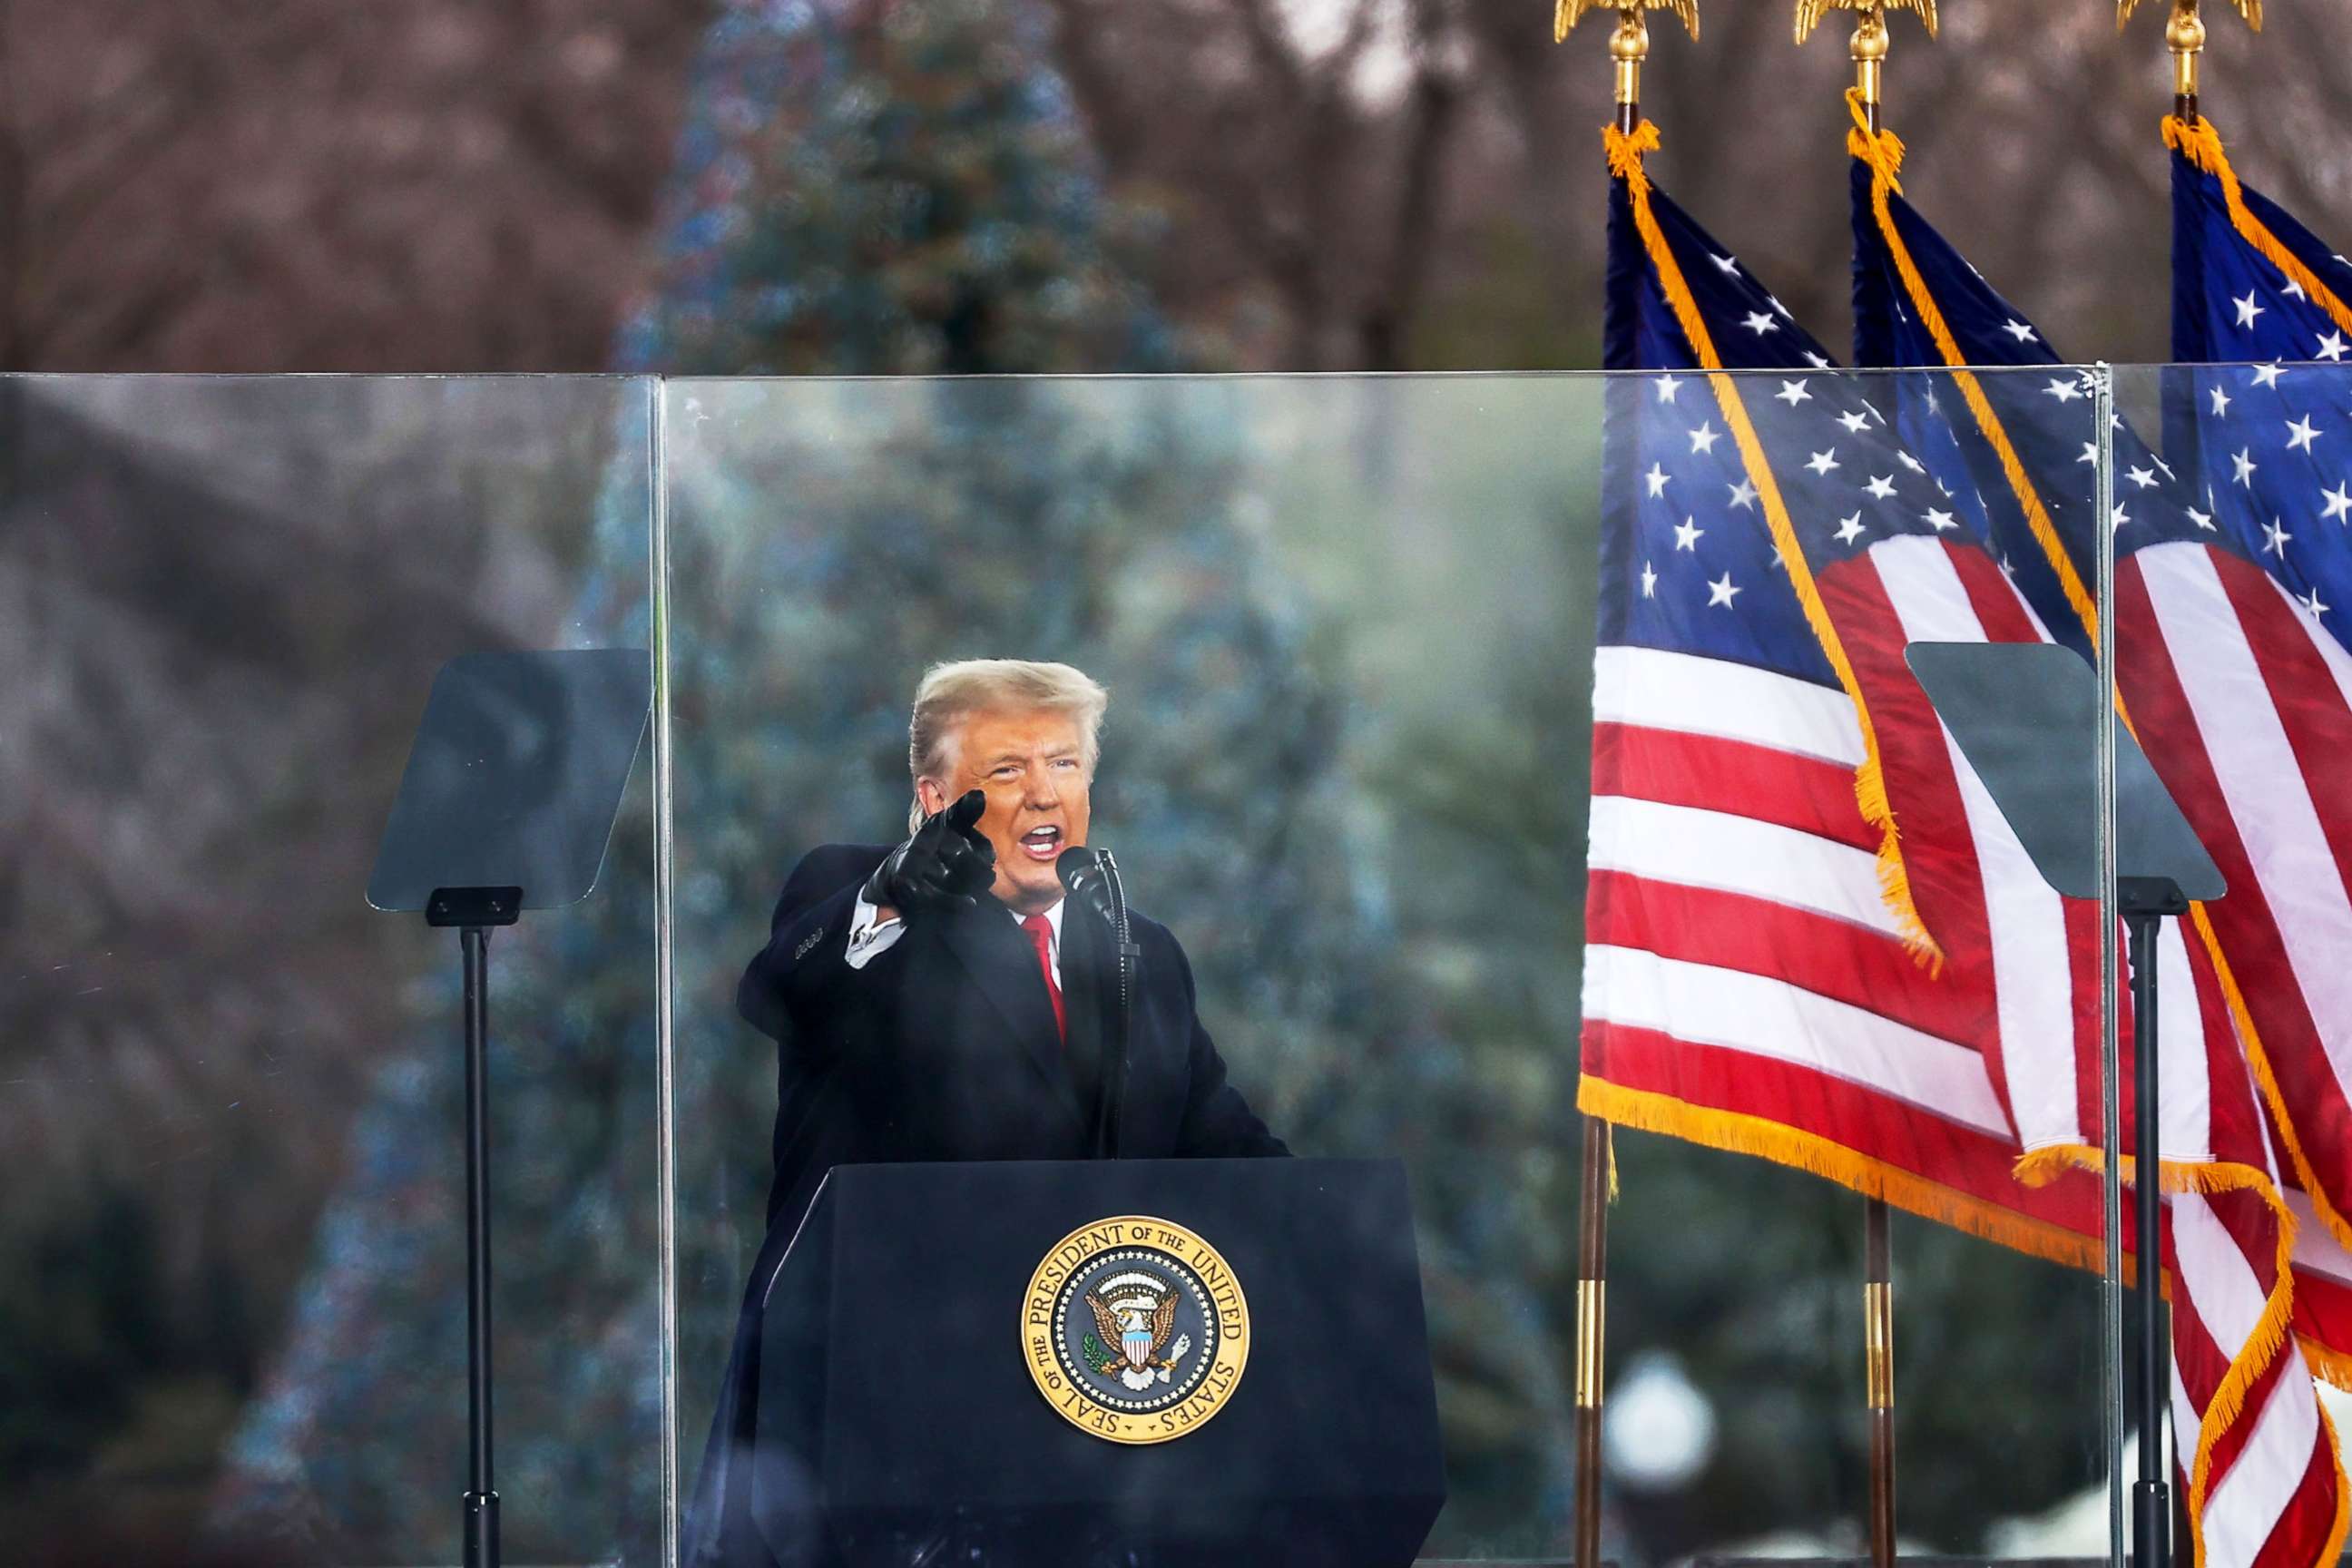 PHOTO: President Donald Trump speaks at "Save America March" rally in Washington D.C., Jan. 06, 2021.